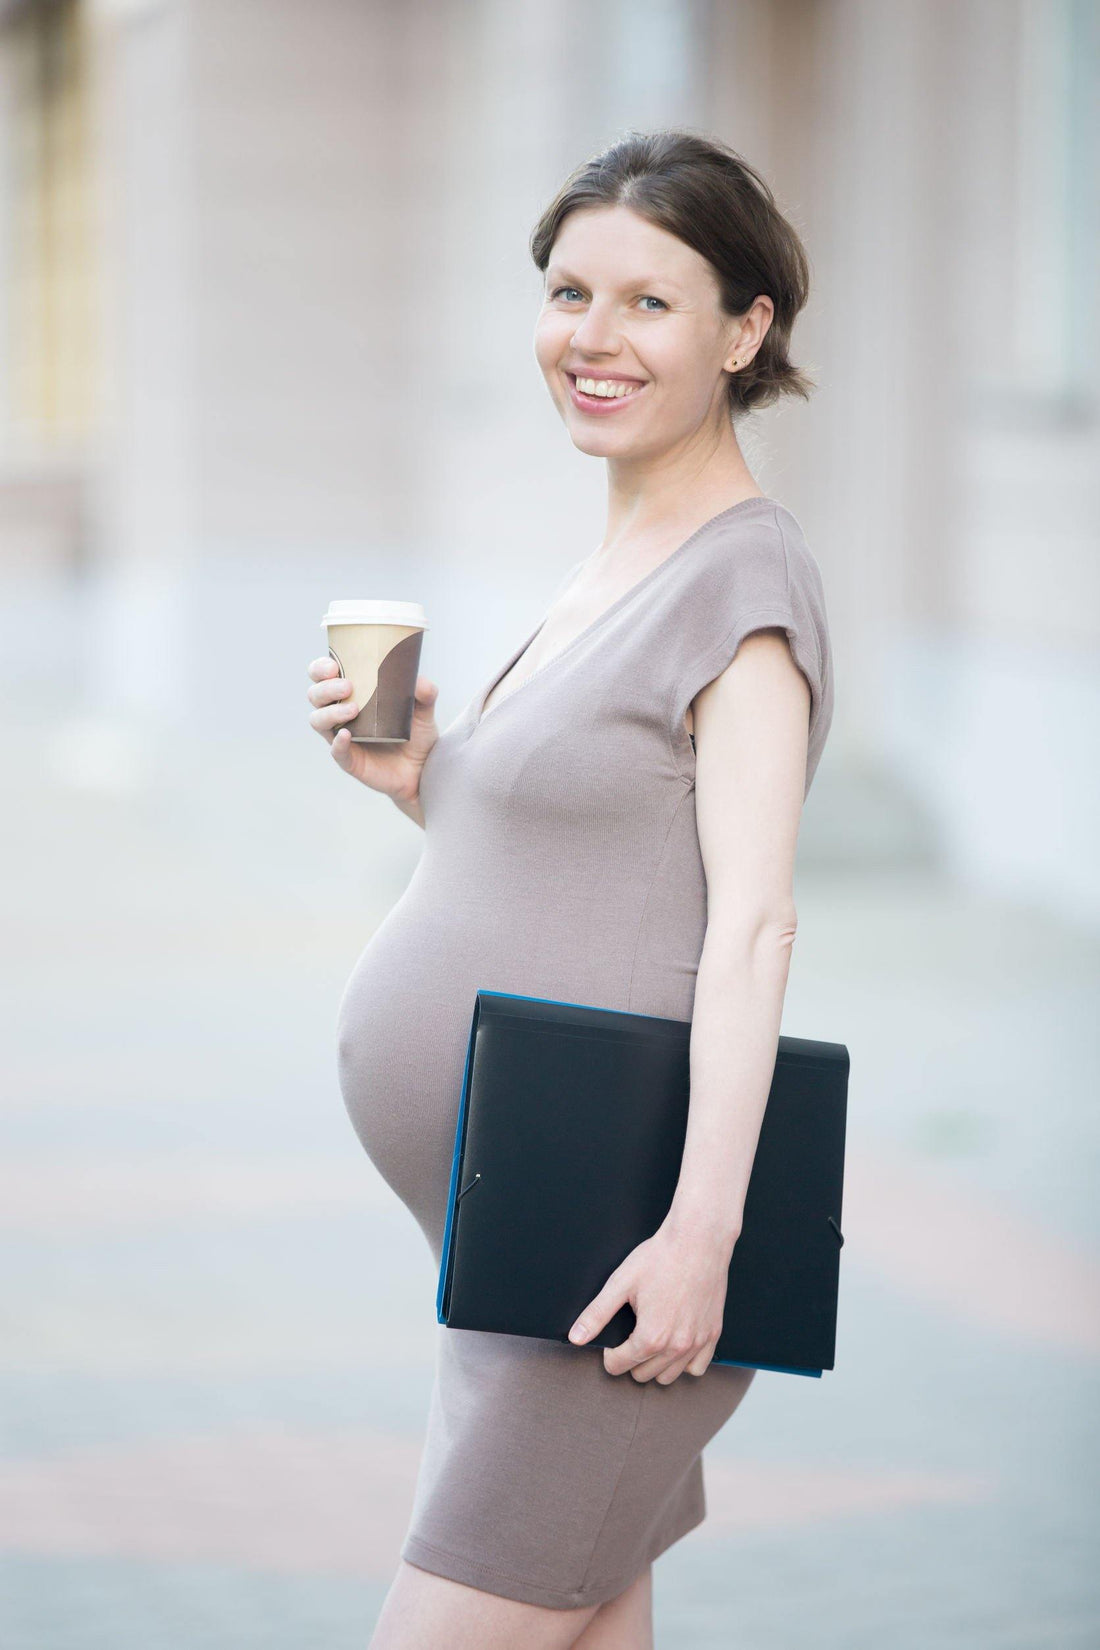 Here's How To Do A Prenatal Workout At Work! - Mumberry